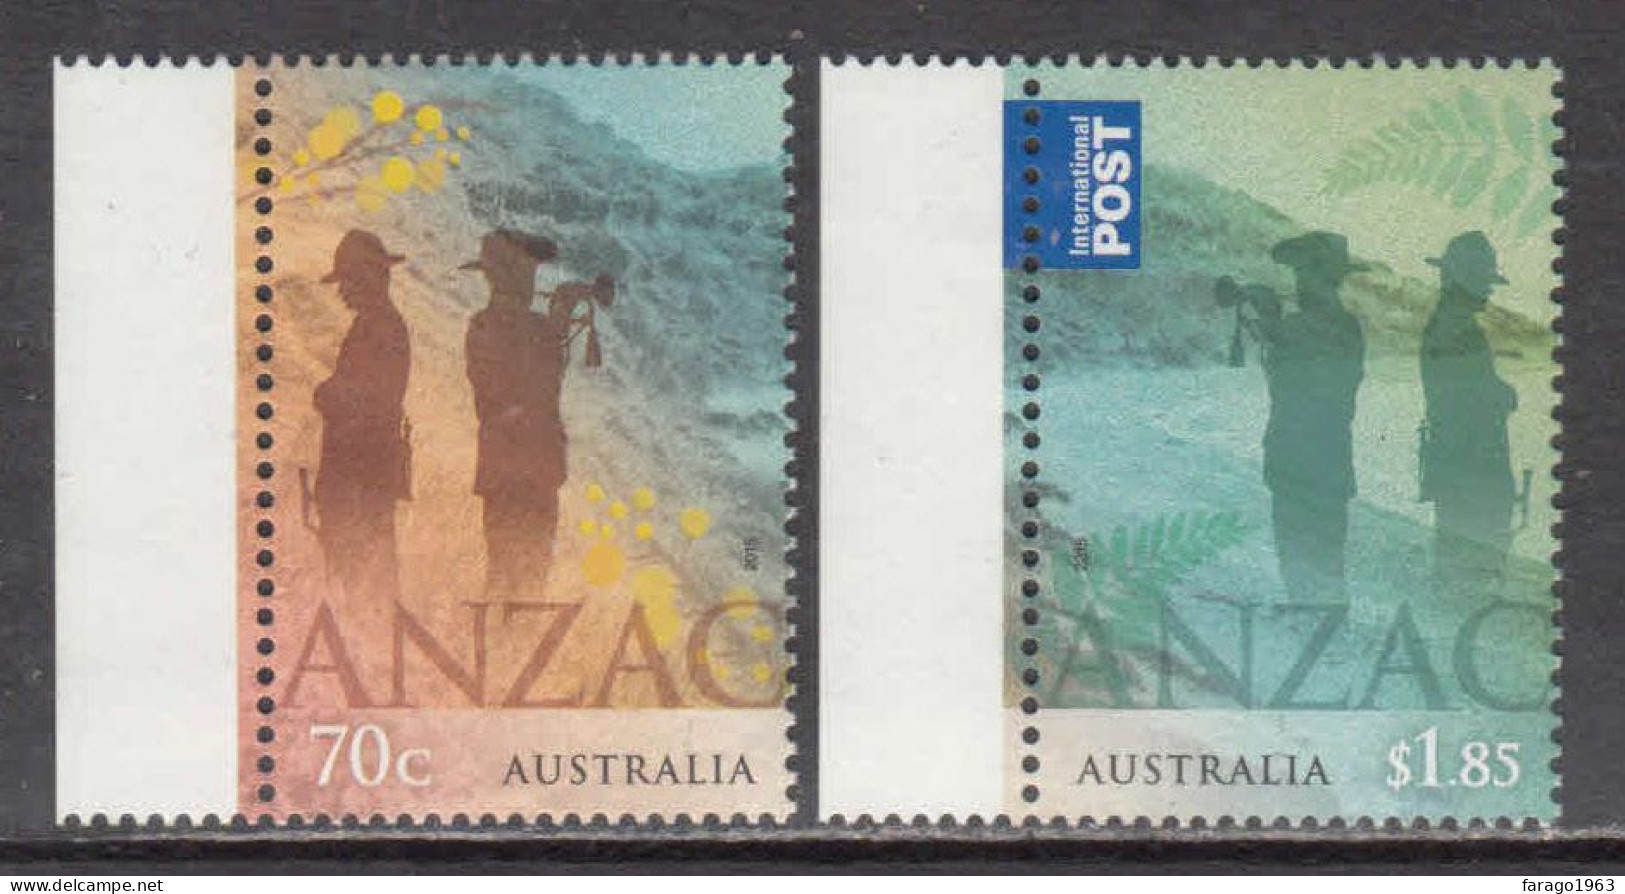 2015 Australia ANZAC Day Military Complete Set Of 2 MNH @ BELOW FACE VALUE - Neufs